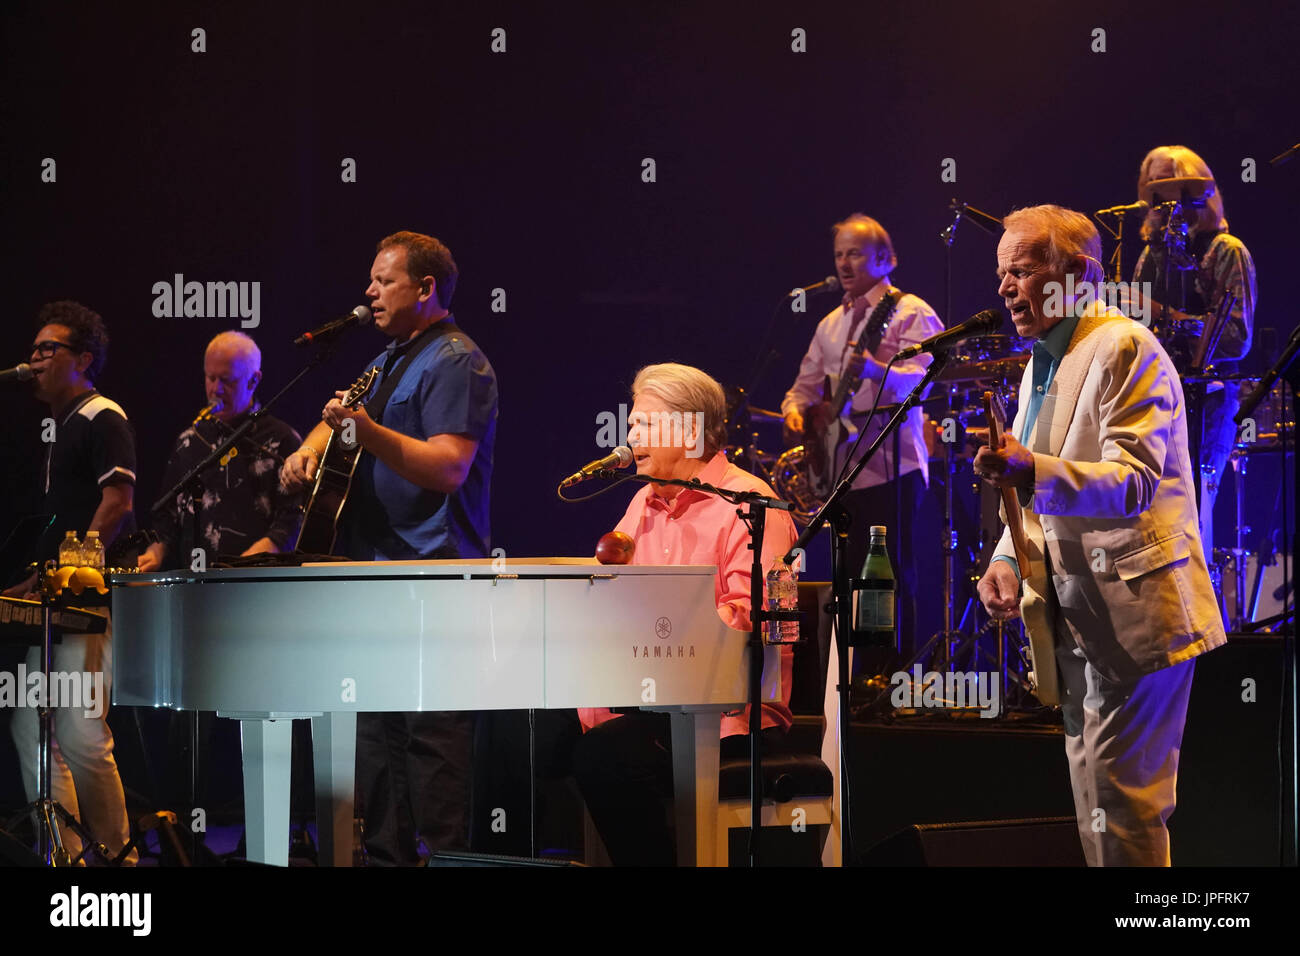 Brian Wilson performing live on stage at Hammersmith Eventim in London as part of the celebration of the 50th anniversary of the Beach Boys' album Pet Sounds. Photo date: Tuesday, August 1, 2017. Photo credit should read: Roger Garfield/Alamy Stock Photo